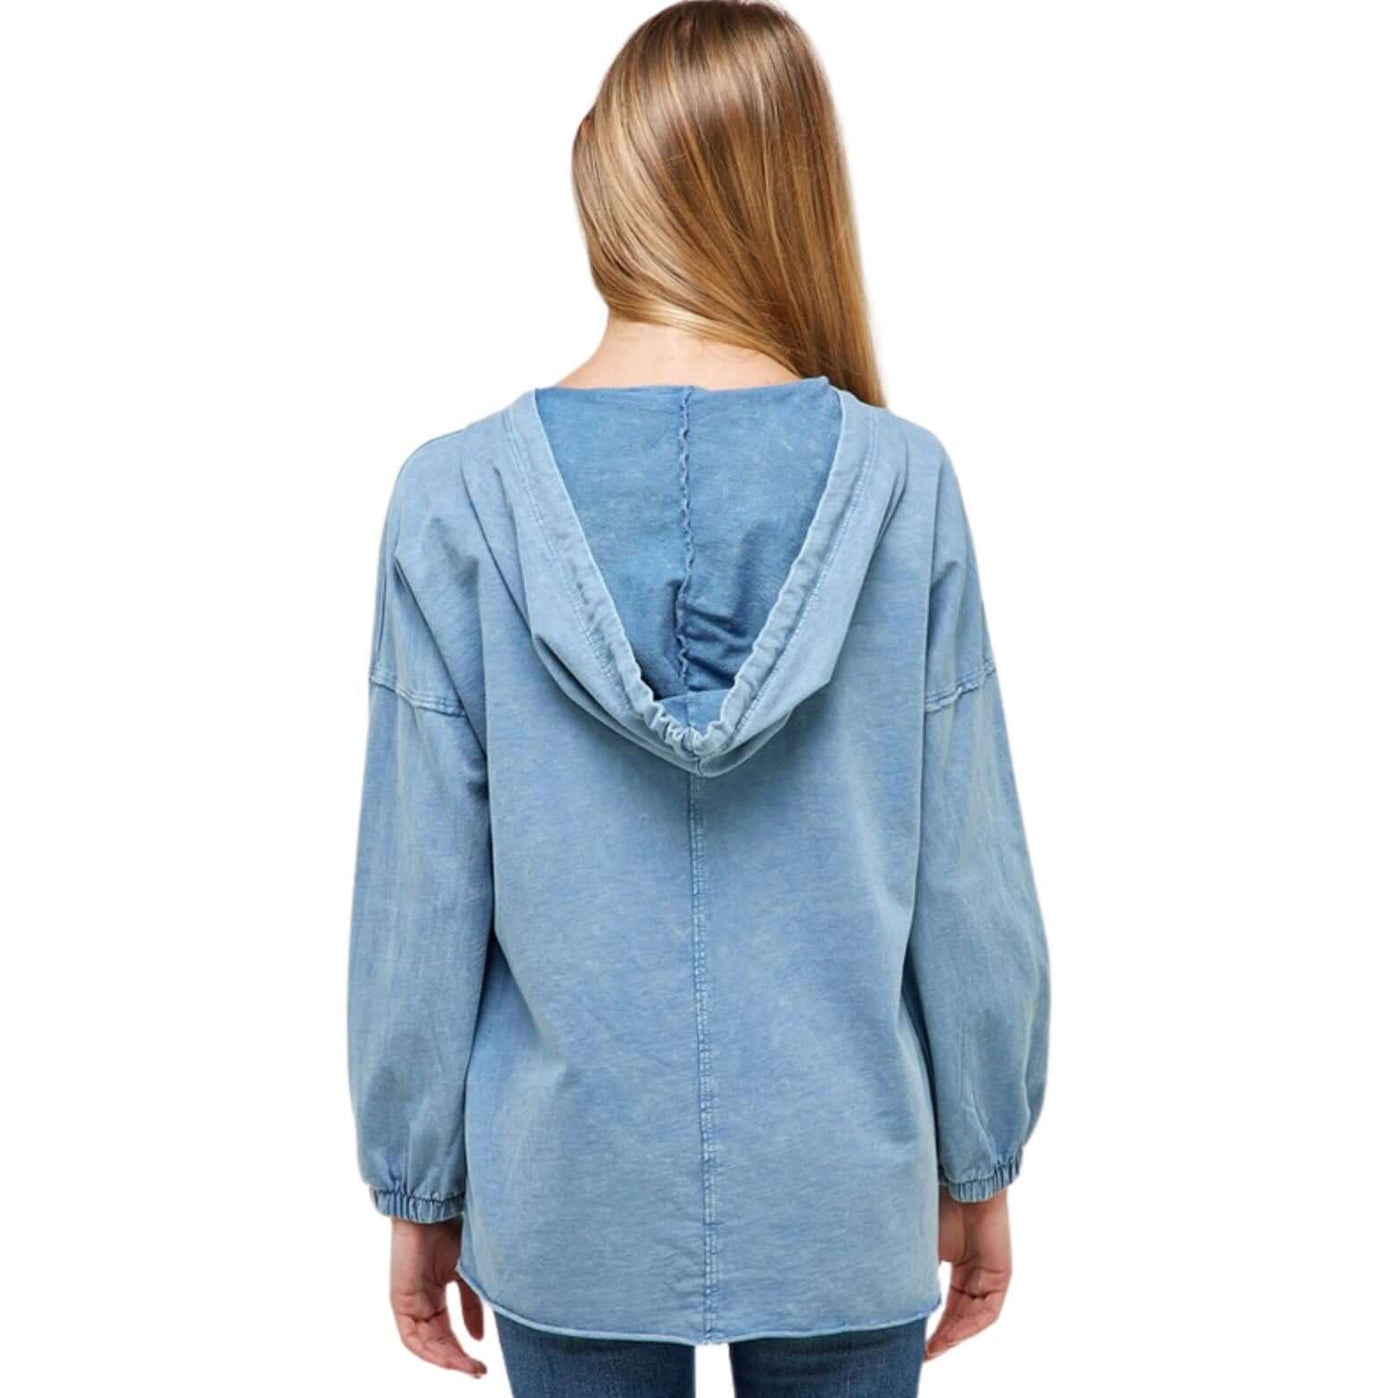 USA made ladies relaxed fit 100% cotton mineral washed tunic with drawstring hoodie Chambray Blue | Classy Cozy Cool Women's Made in America Boutique